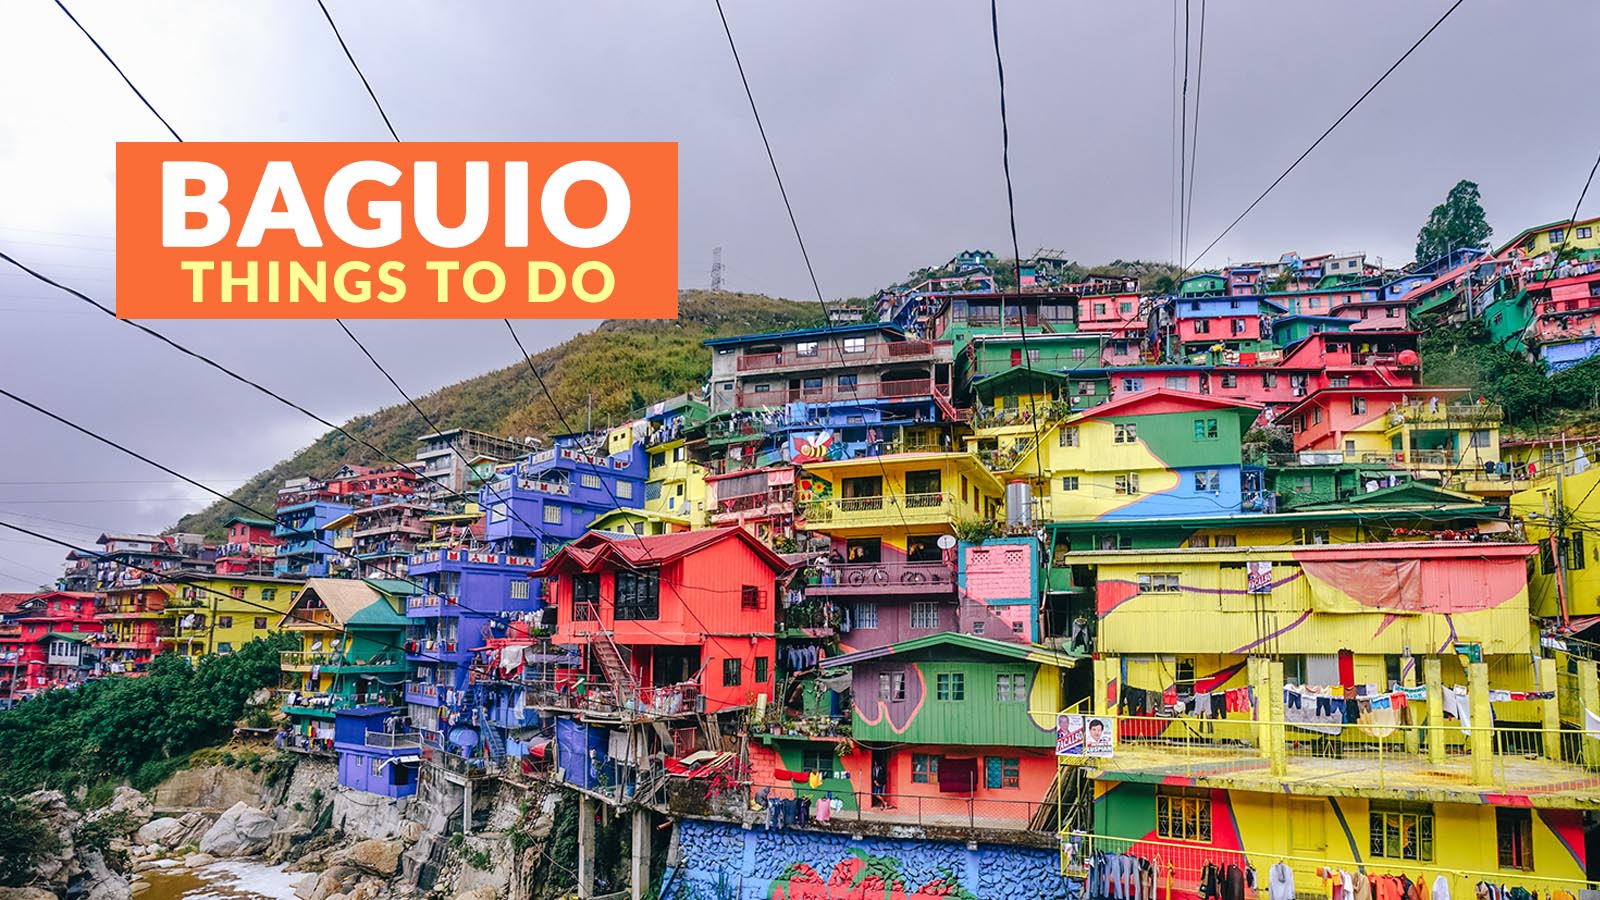 baguio tourist spots itinerary 3 days